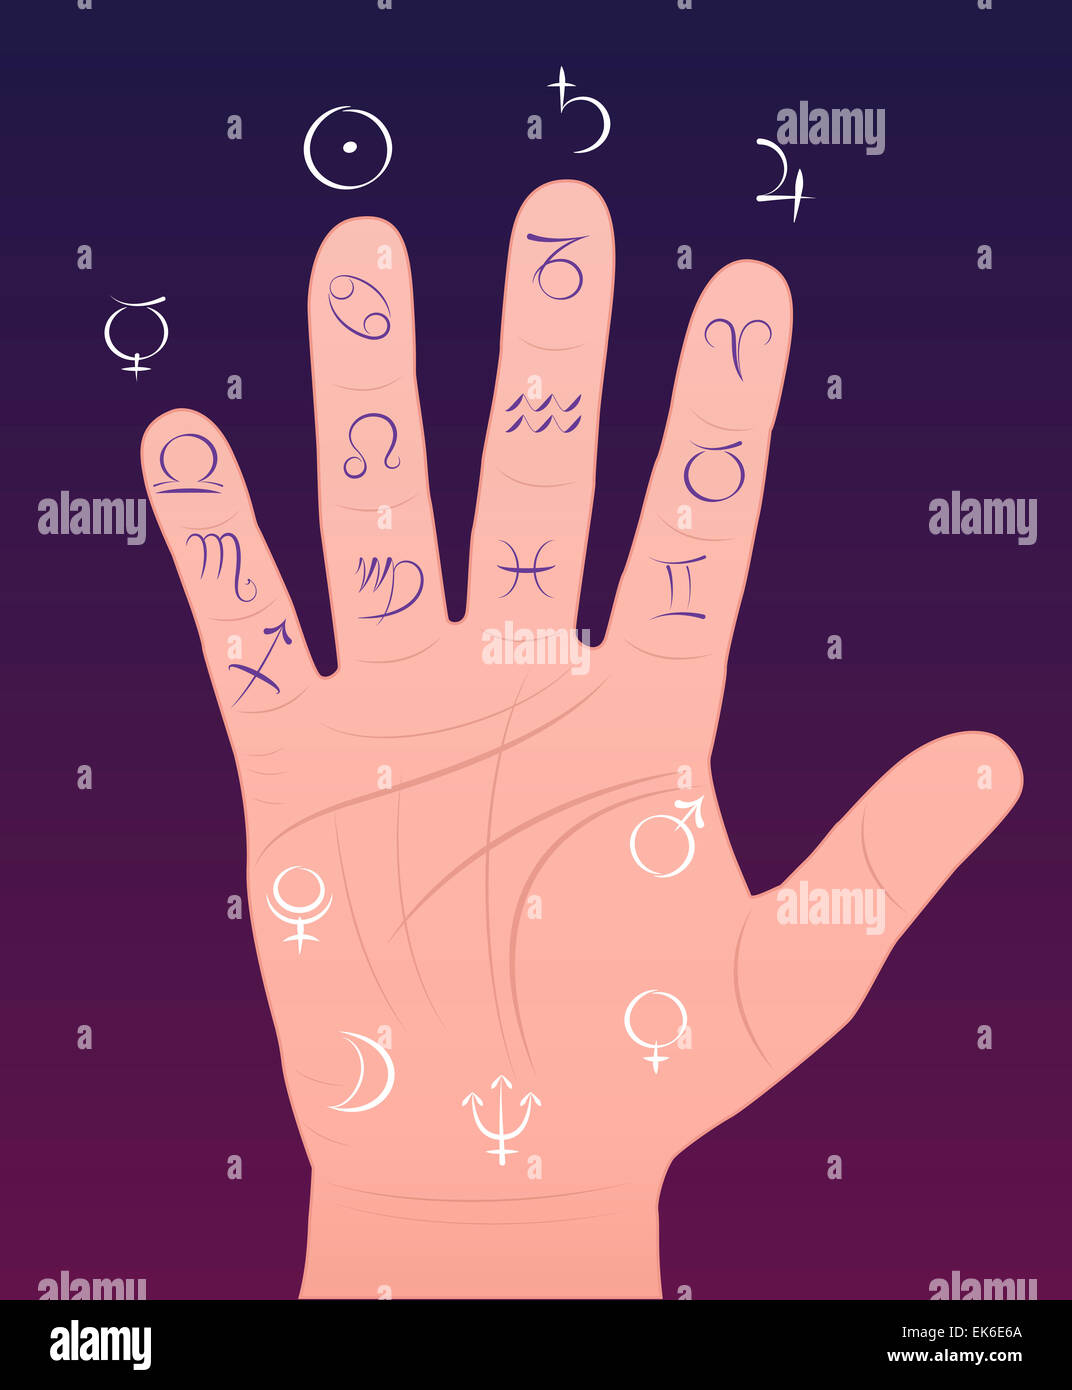 Palmistry - Right hand with signs of the zodiac and planetary gods for clarification of astrological analogies. Stock Photo